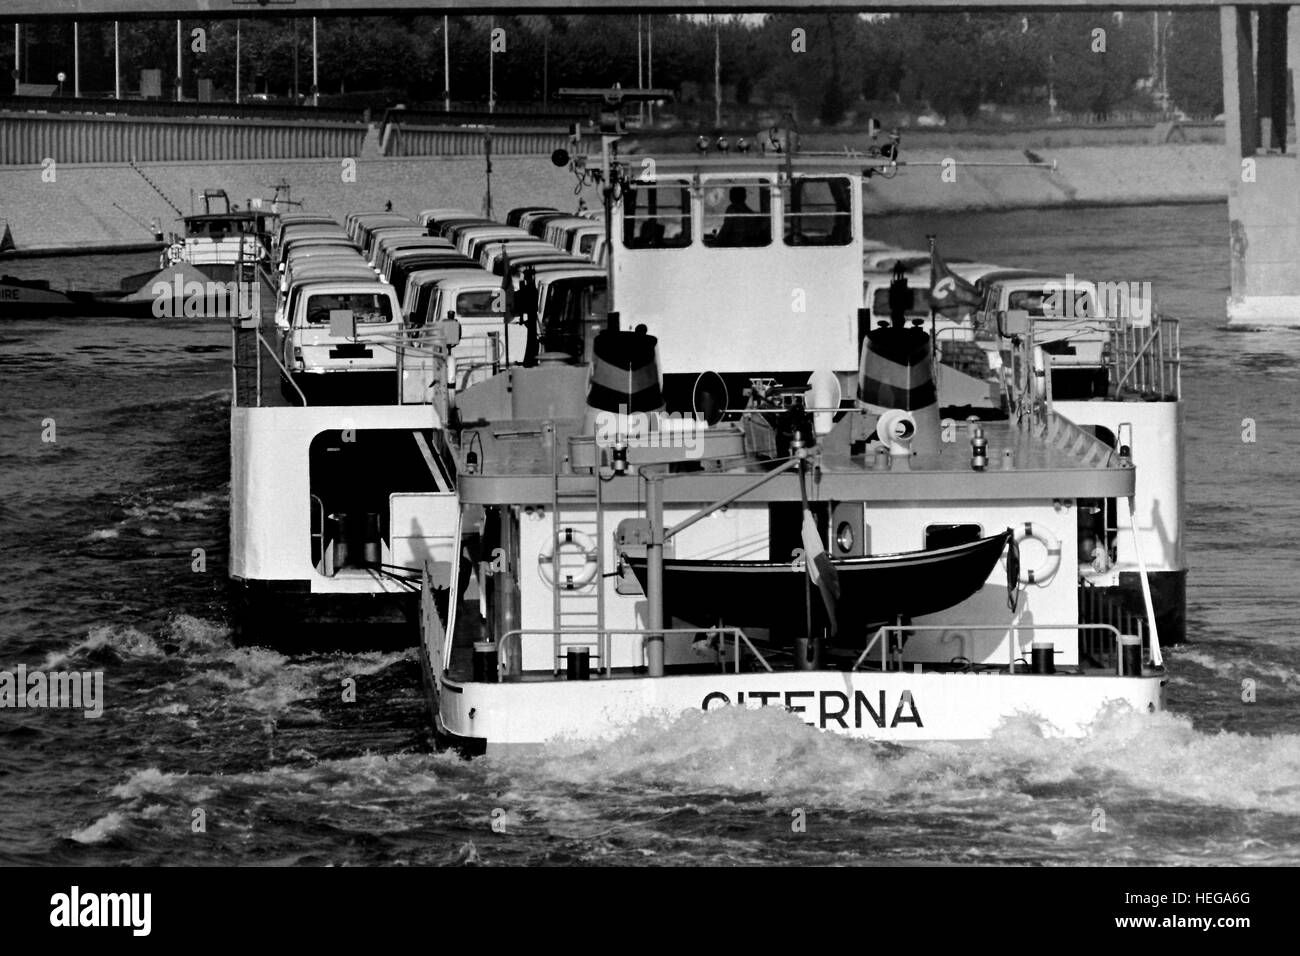 AJAXNETPHOTO. 1971. RIVER SEINE, FRANCE. - CAR TRANSPORTER - CITERNA CAR TRANSPORTER PUSHER-BARGE WITH A FULL LOAD OF RENAULT CARS FROM THE ILE SEGUIN FACTORY AT BOULOGNE-BILLANCOURT ON ITS WAY NORTH TO THE FLINS (AUBERGENVILLE) FACTORY.  PHOTO:JONATHAN EASTLAND/AJAX  REF:151204 162 Stock Photo